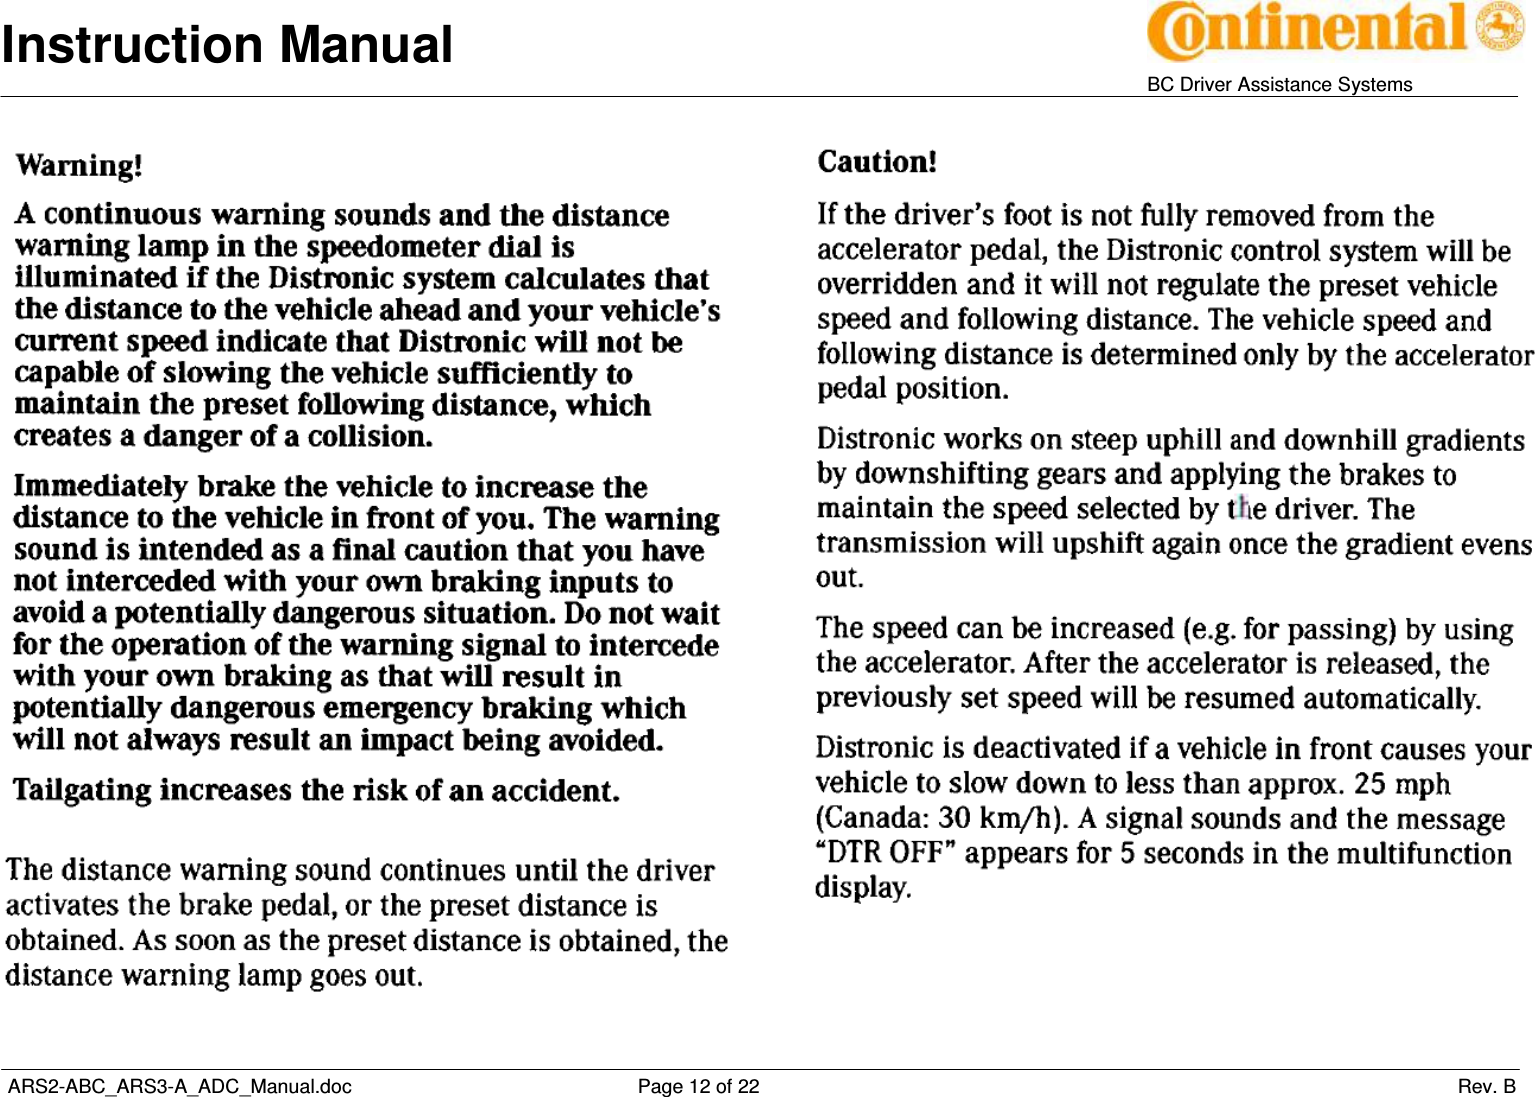 Instruction Manual   BC Driver Assistance Systems  ARS2-ABC_ARS3-A_ADC_Manual.doc     Page 12 of 22                 Rev. B   